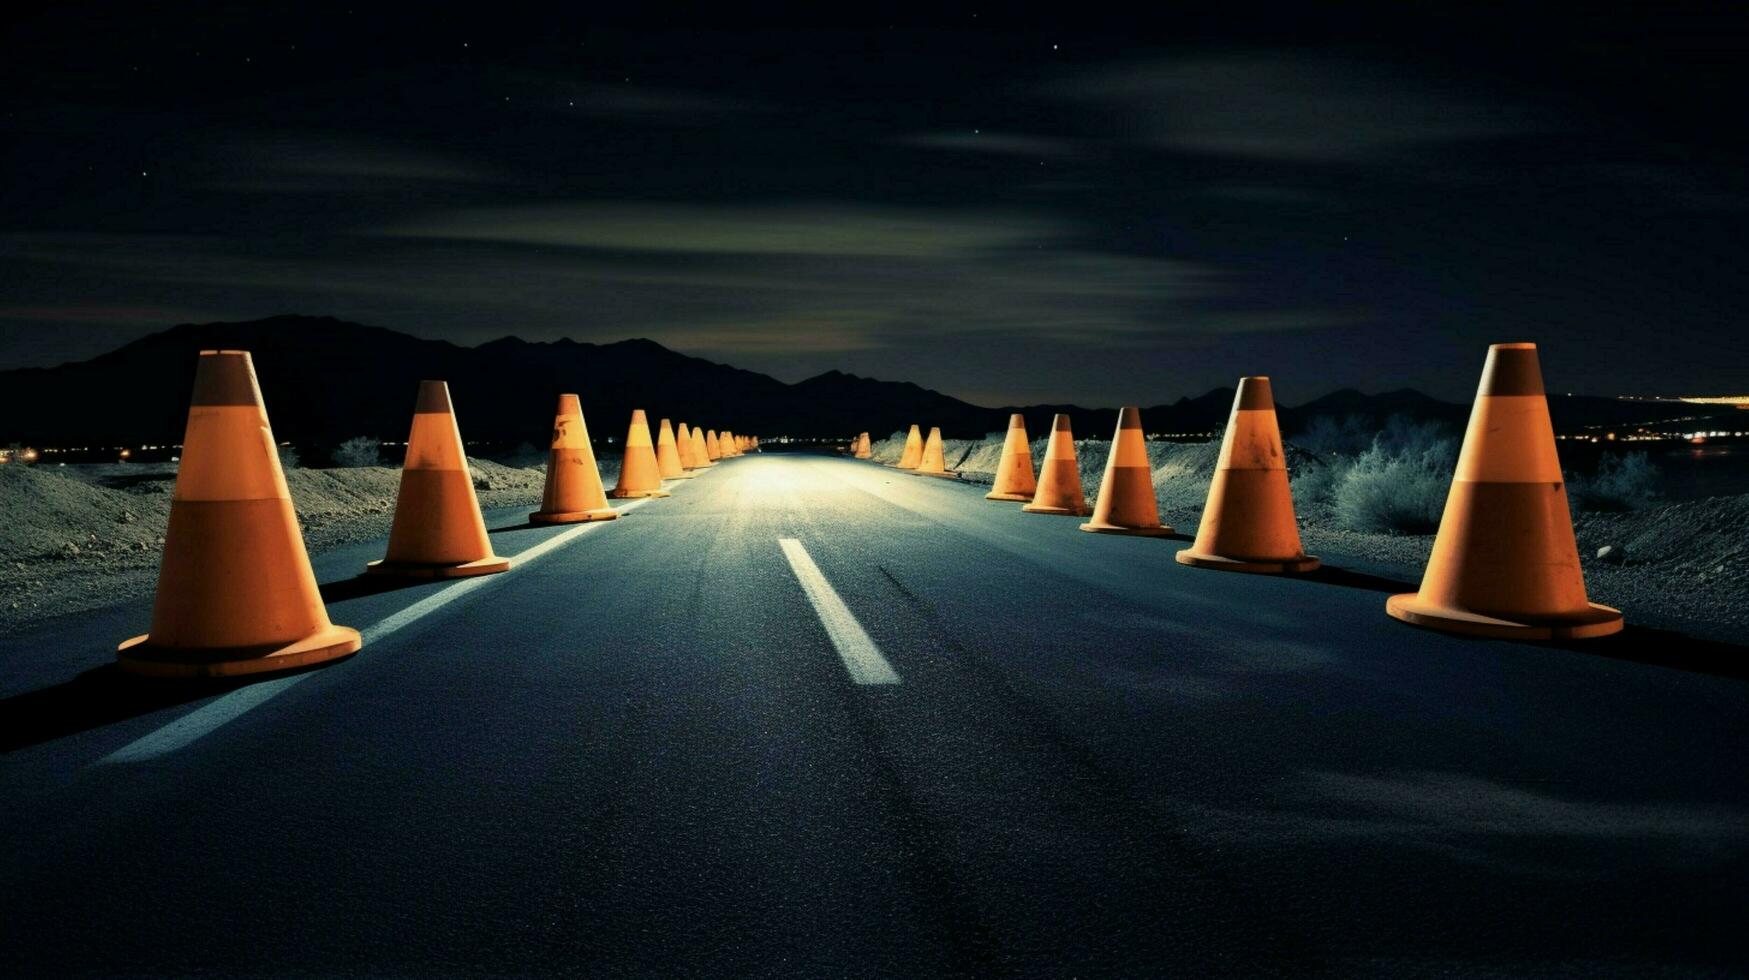 traffic cones on a deserted road at night photo